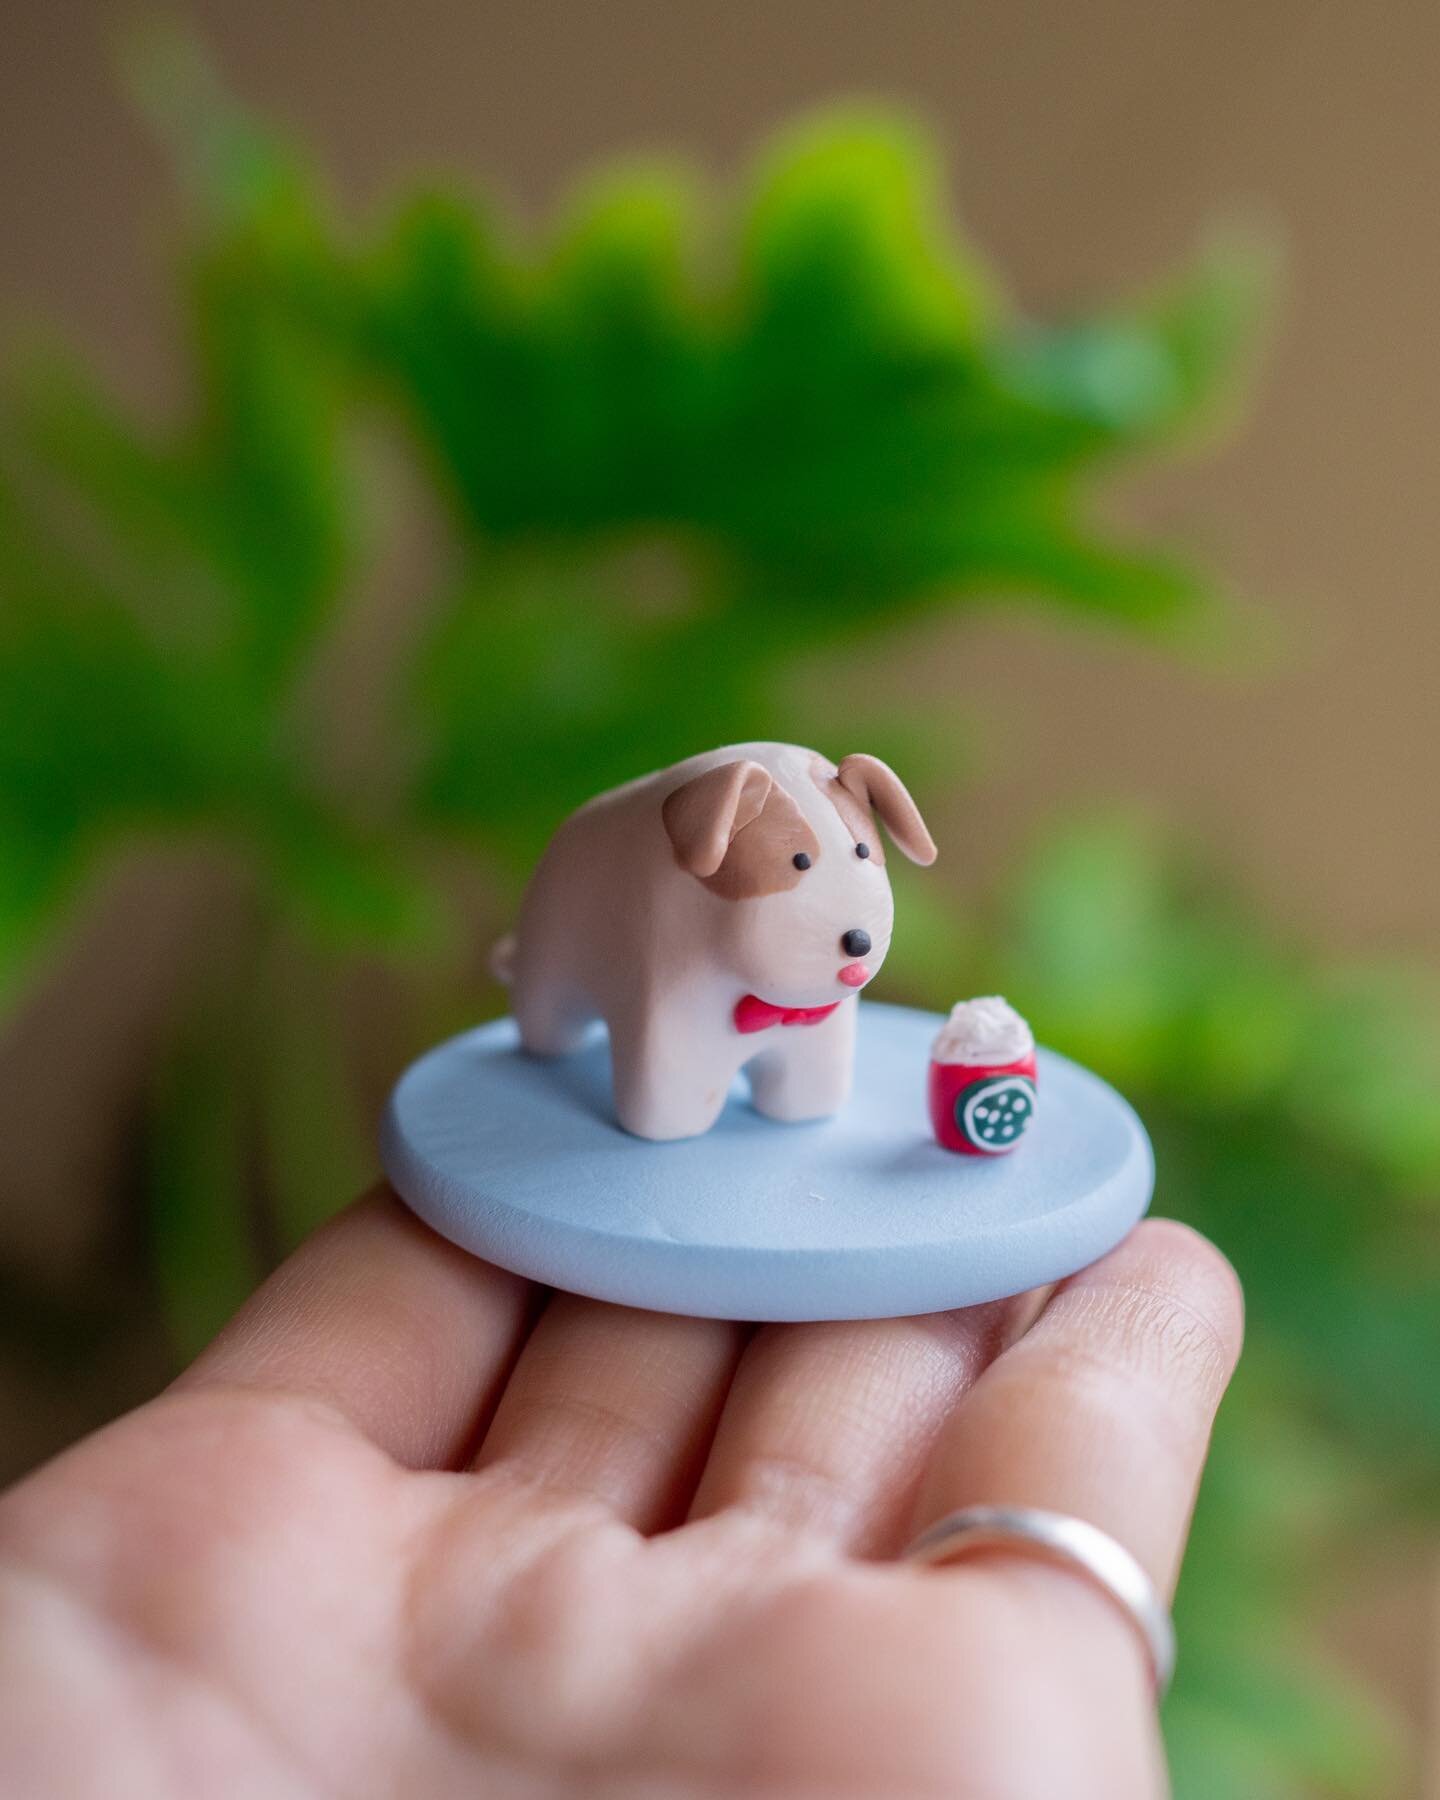 Another challenging order🌱

Still a work in progress with learning how to make the minis look exactly like the actual pup🐶
-
-
-
#polymerclay #clayartist #clayanimals #clayminiature #clayfigure #clayfigurine #craftartist #handmade #madetoorder #cus